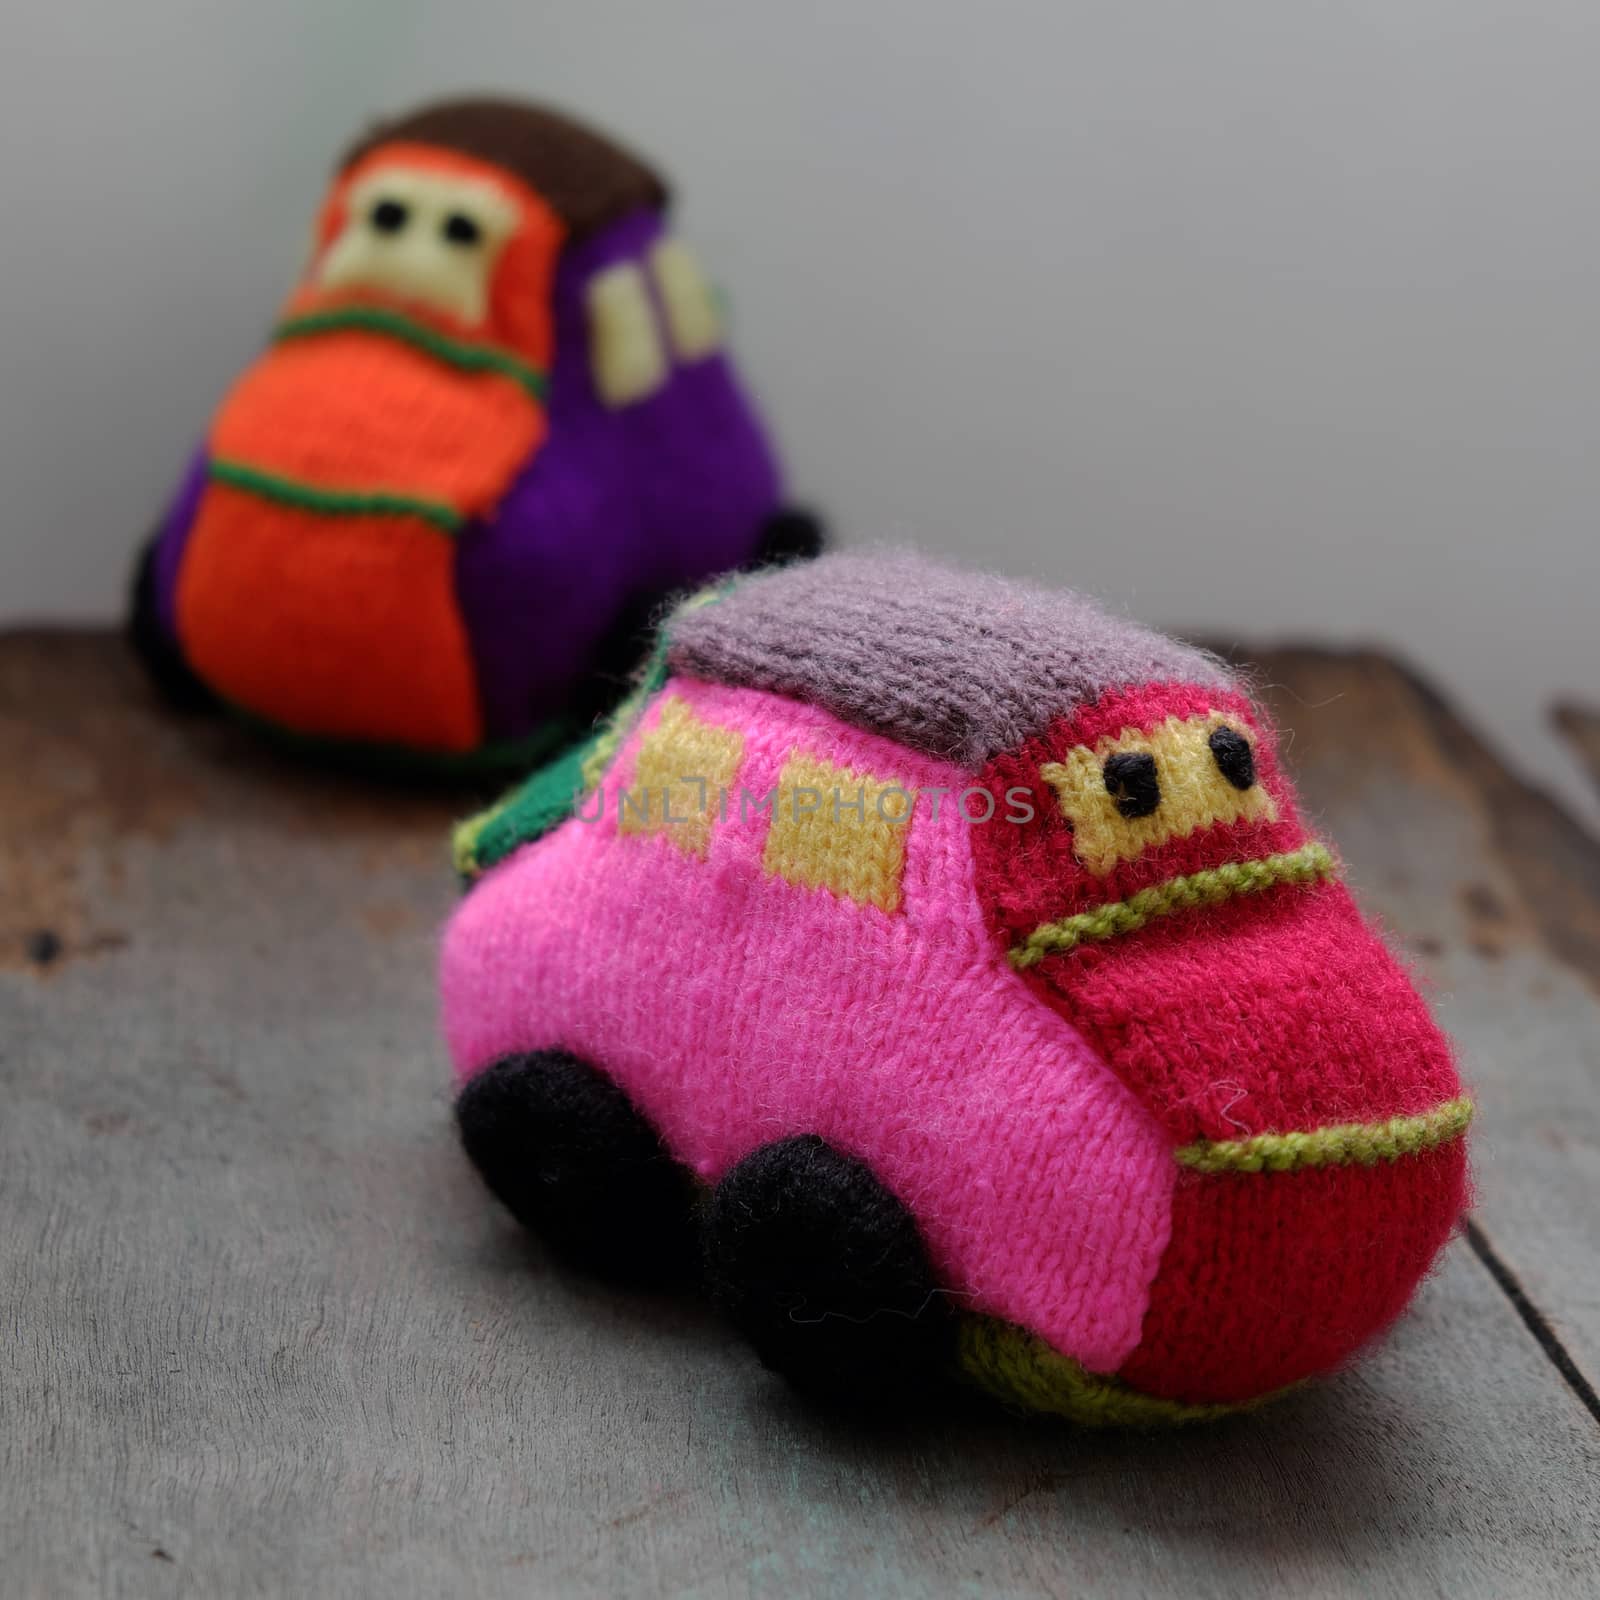 Handmade gift for children, knit baby car by xuanhuongho